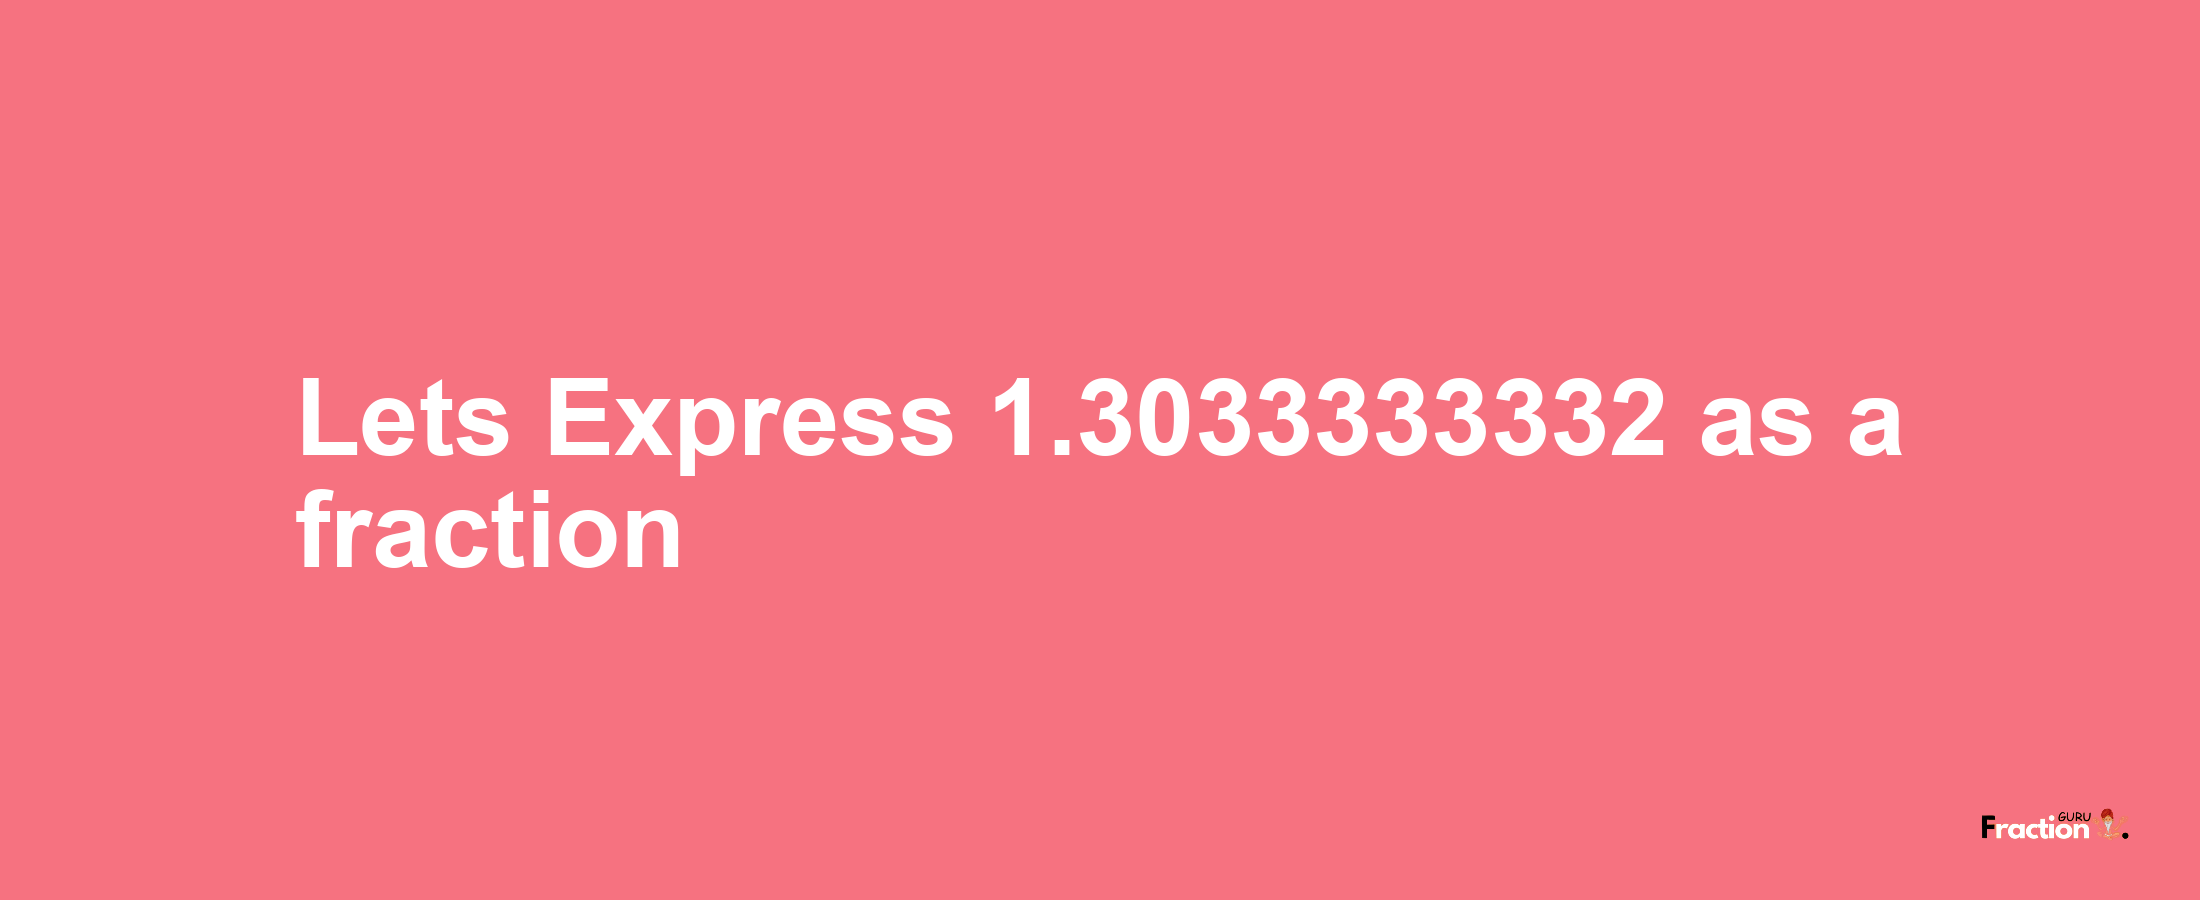 Lets Express 1.3033333332 as afraction